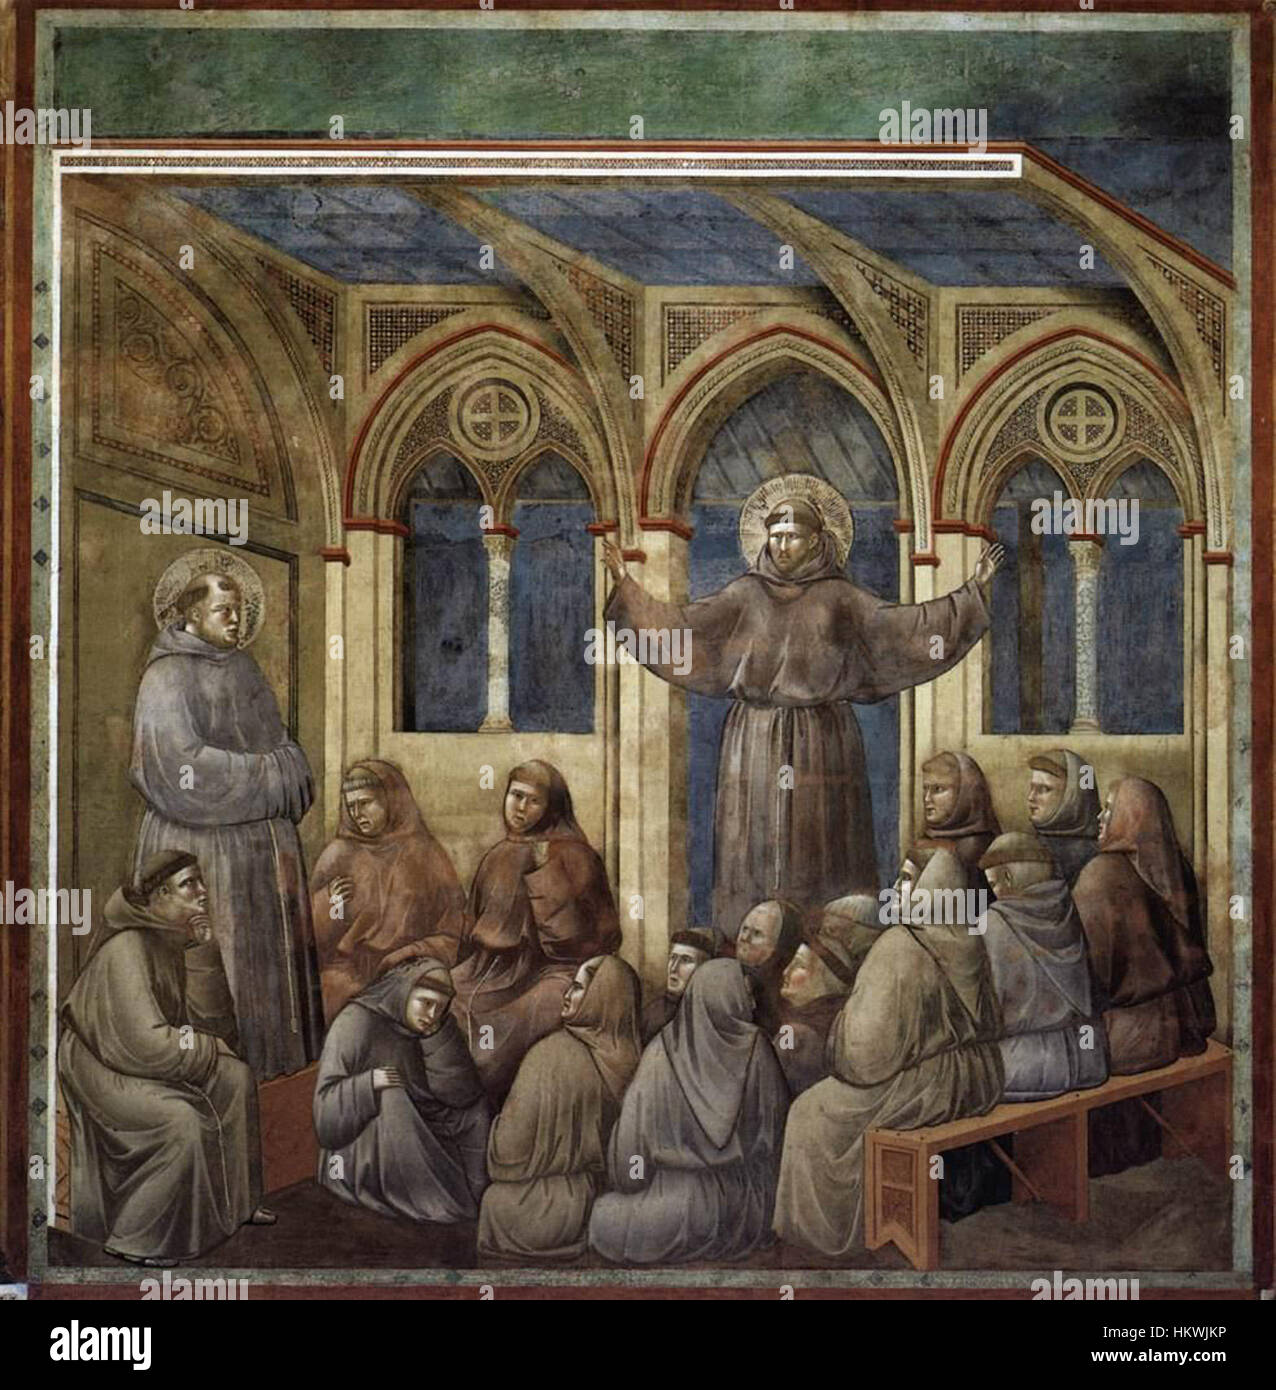 Giotto di Bondone, Legend of St Francis of Assisi: Exorcism of the 